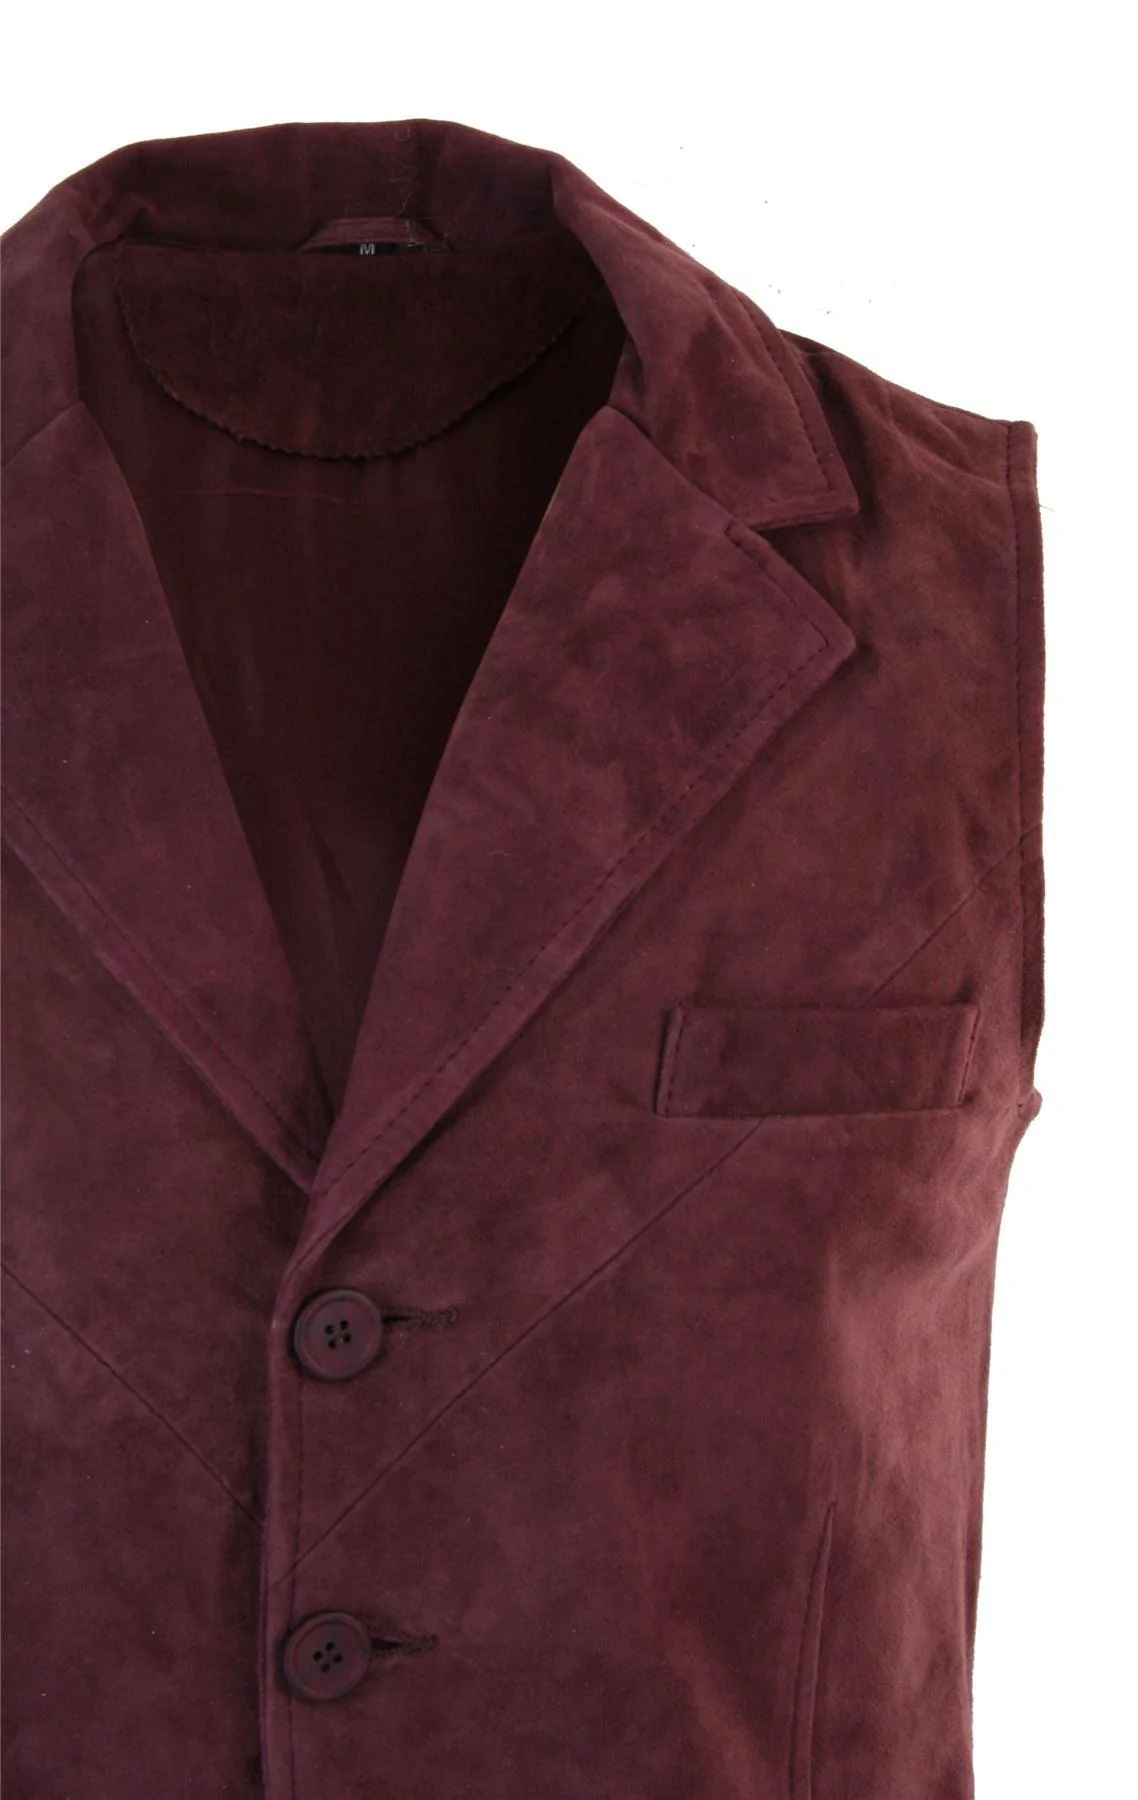 Mens Real Suede Leather Burgundy Smart Casual Gilet Waistcoat Vintage Retro